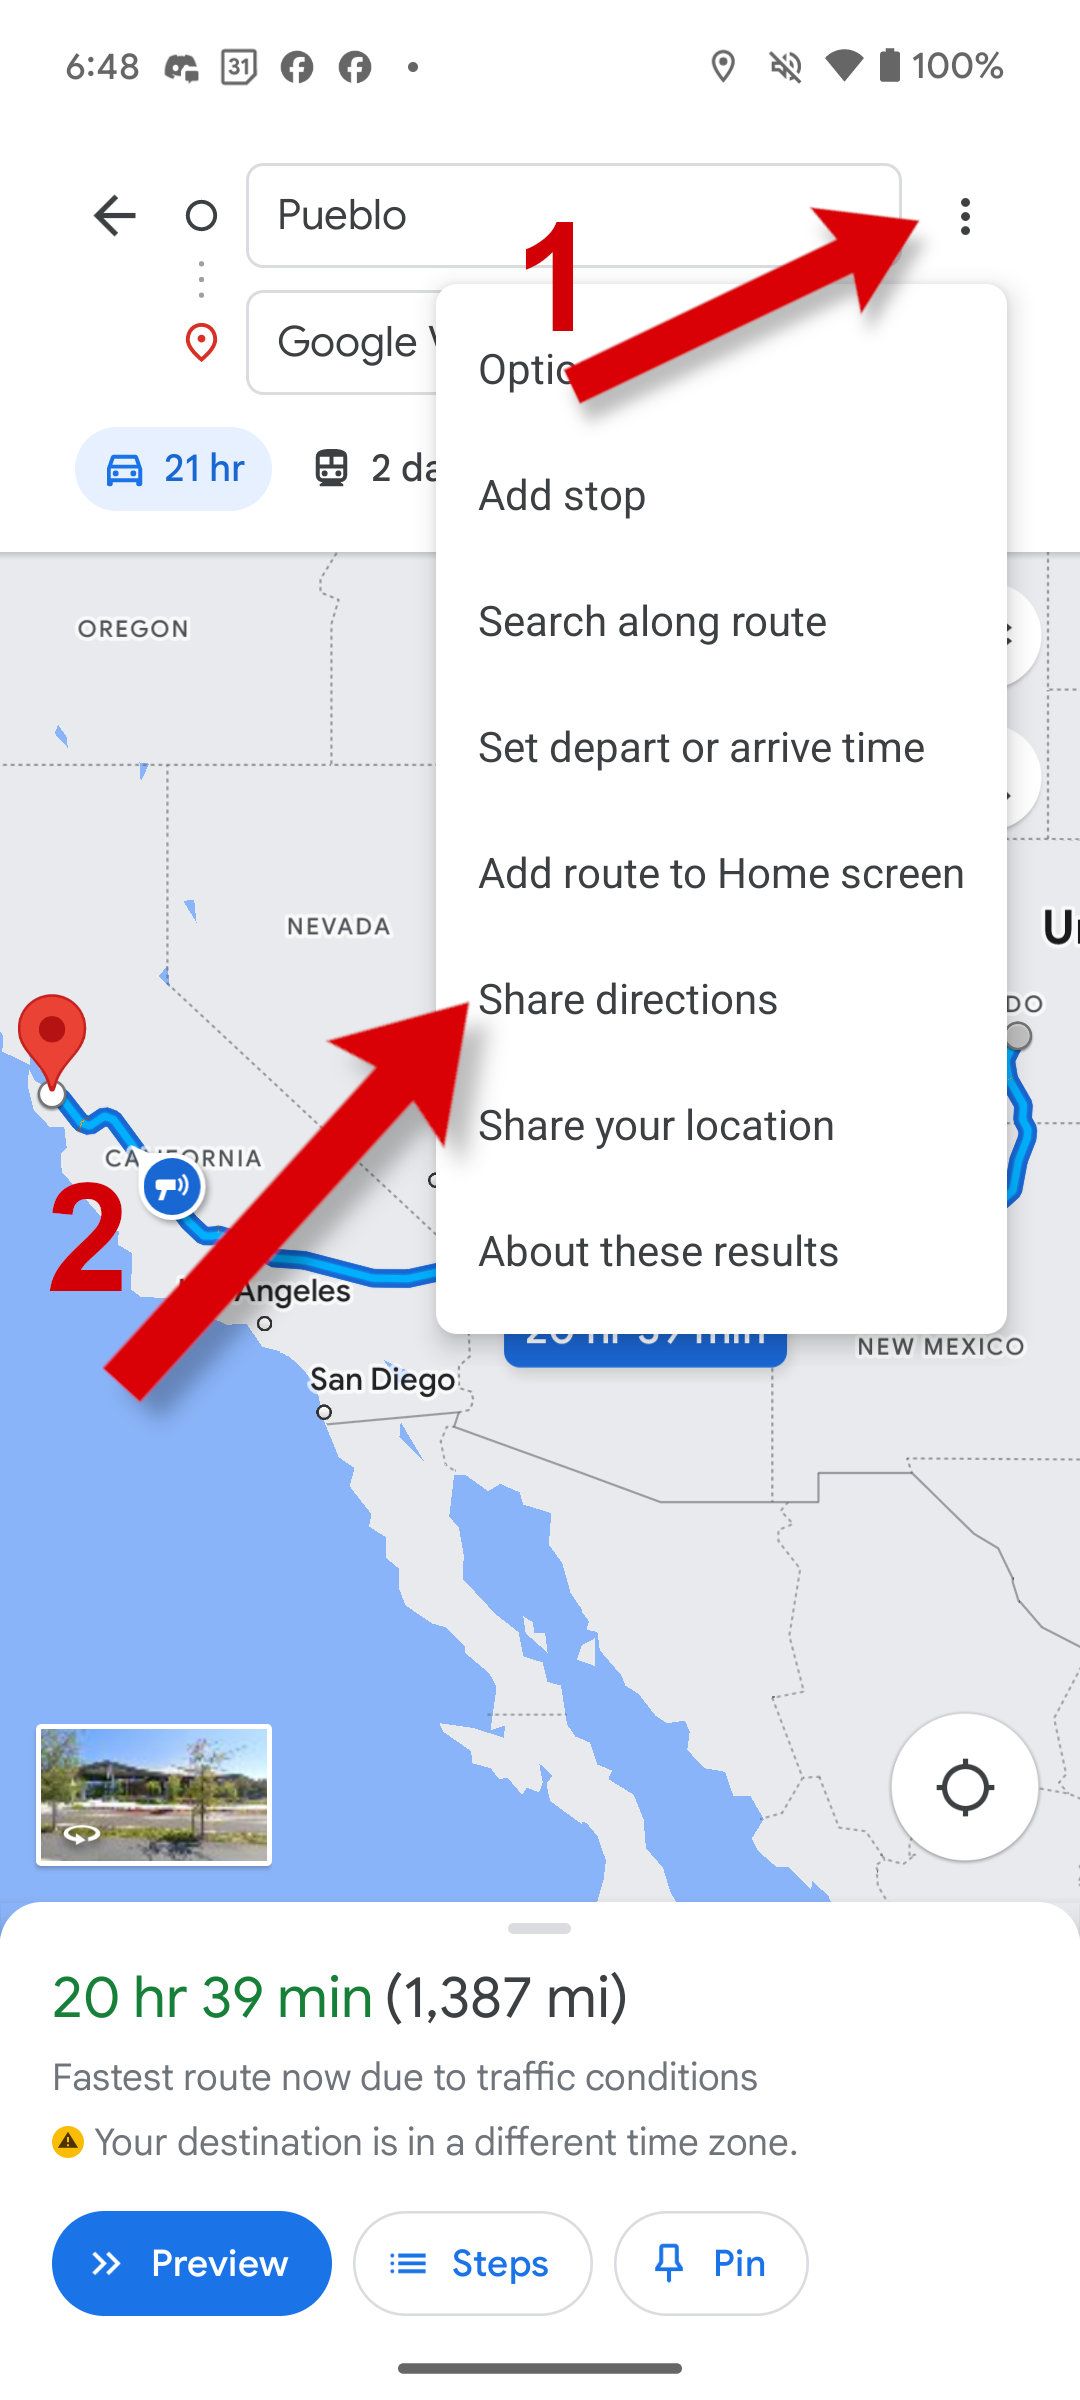 How to easily print directions from Google Maps